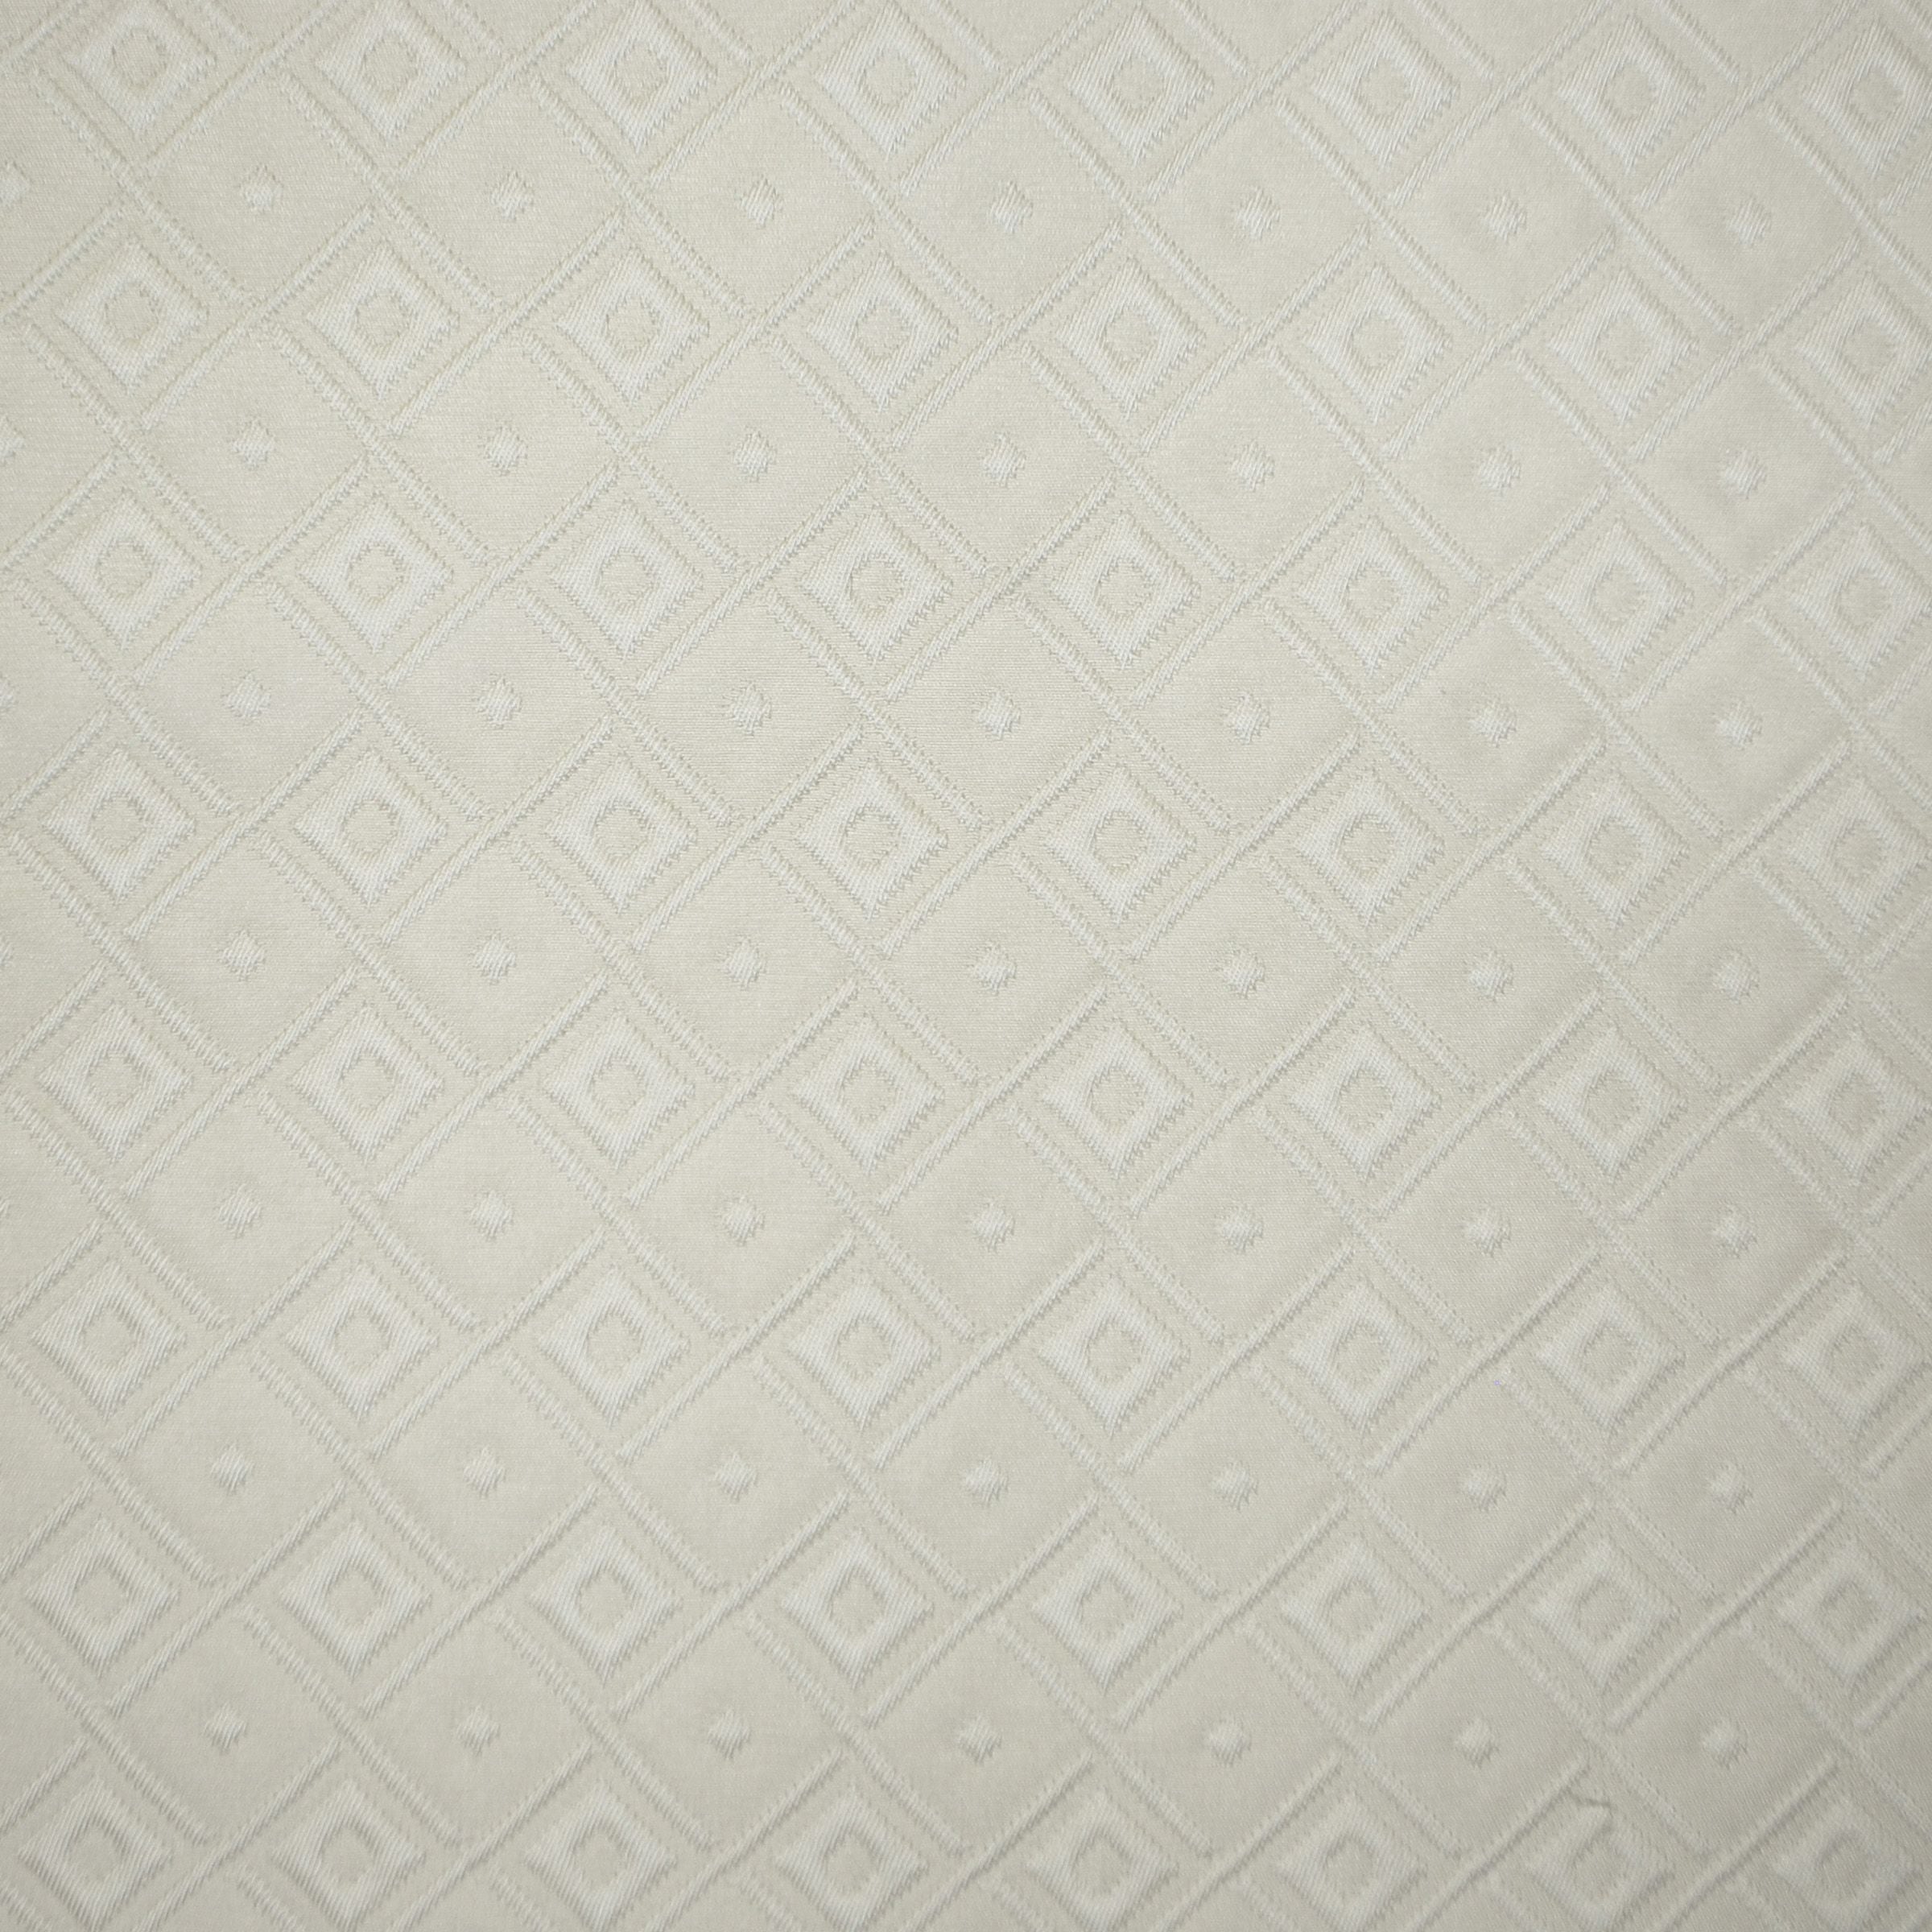 Harrison House fabric in cream color - pattern number VW 0004LASS - by Scalamandre in the Old World Weavers collection